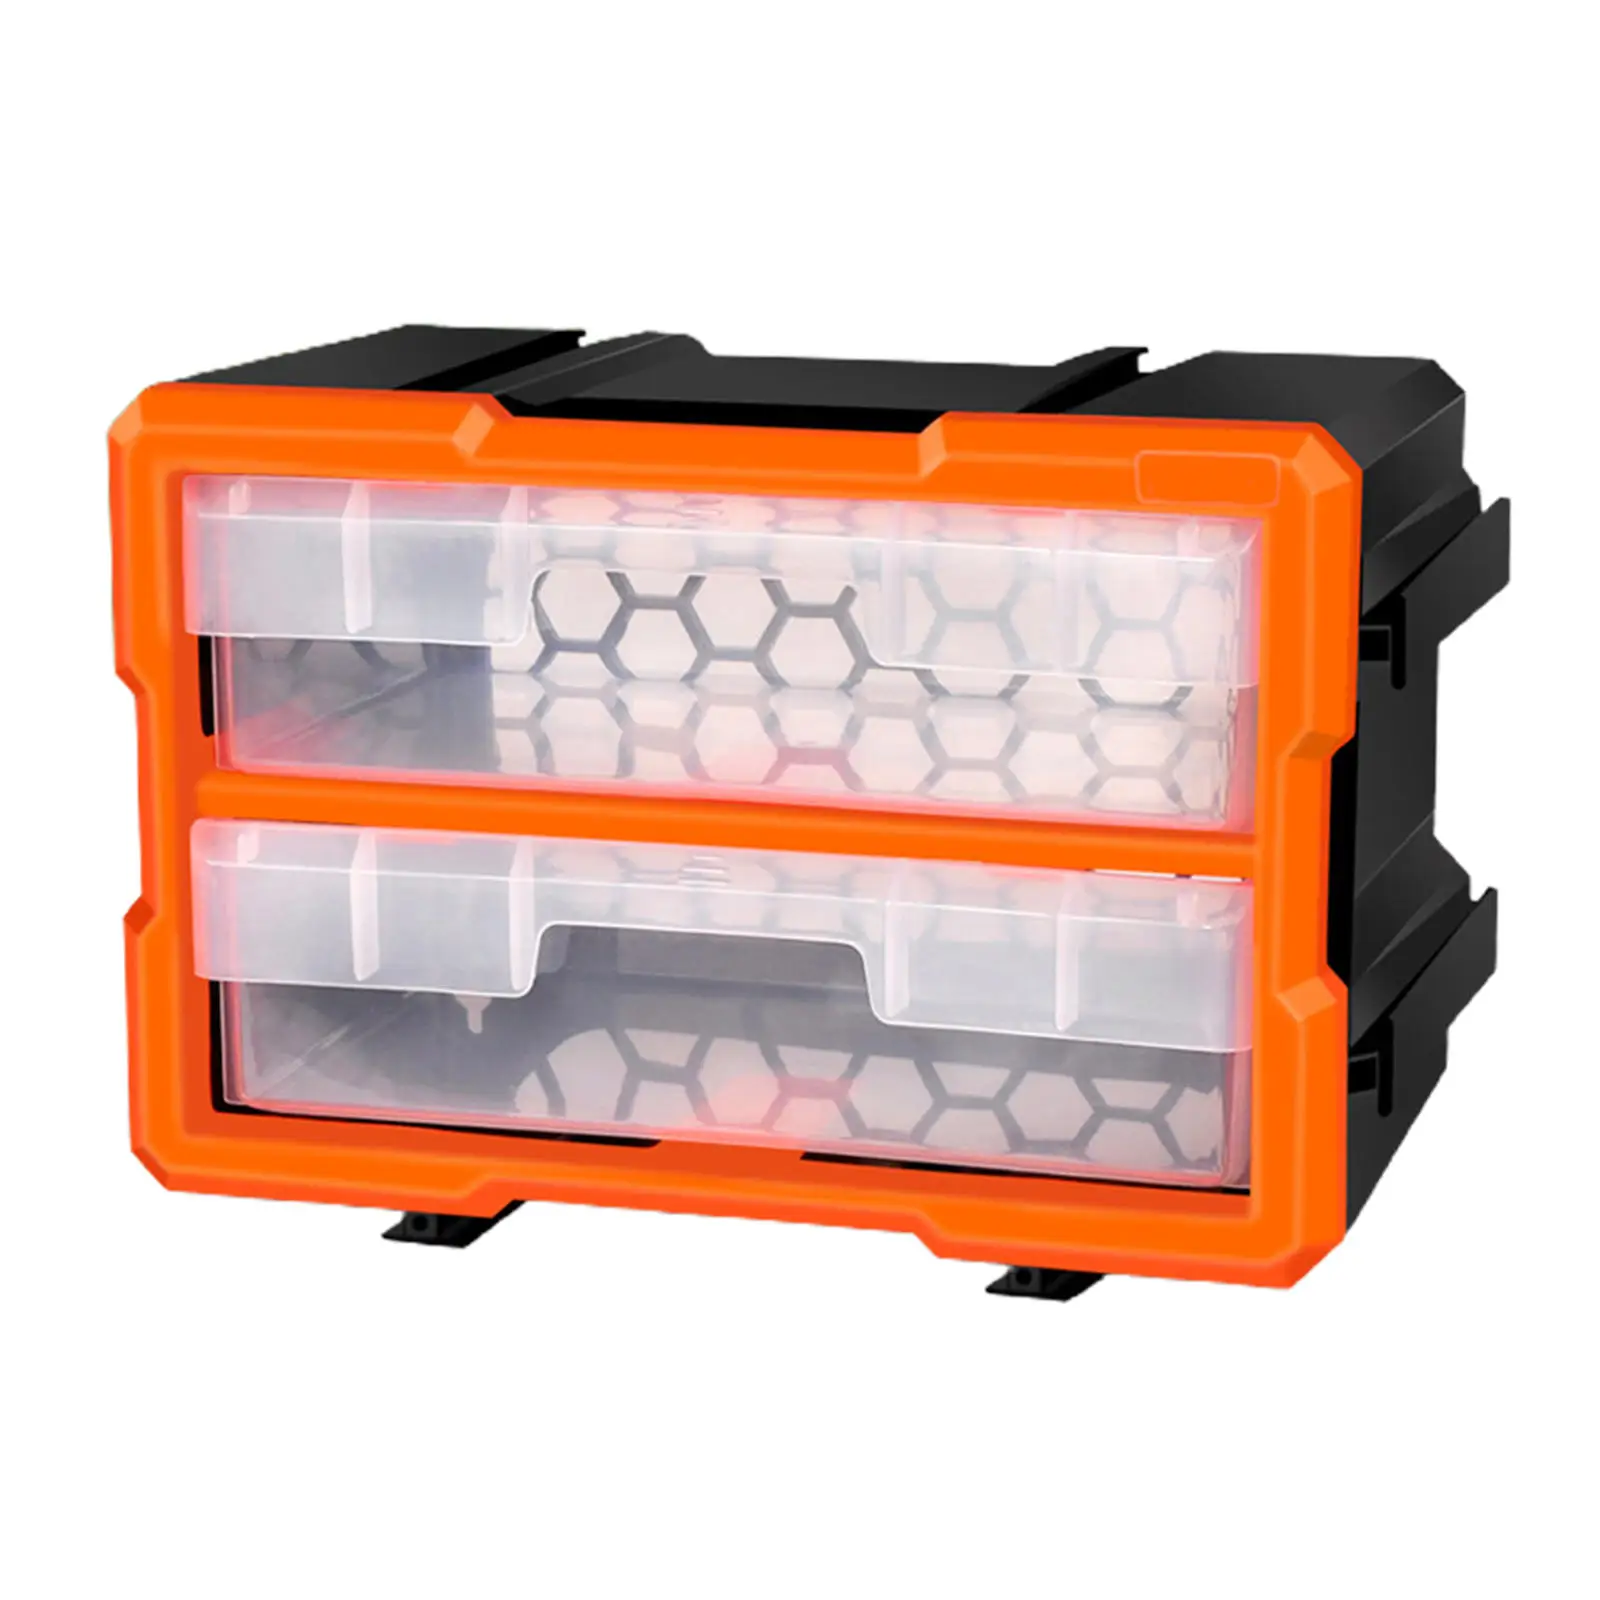 Hardware Box Storage Box Durable Plastic in a Slim Design with Compartments Excellent for Screws Nuts and Bolts